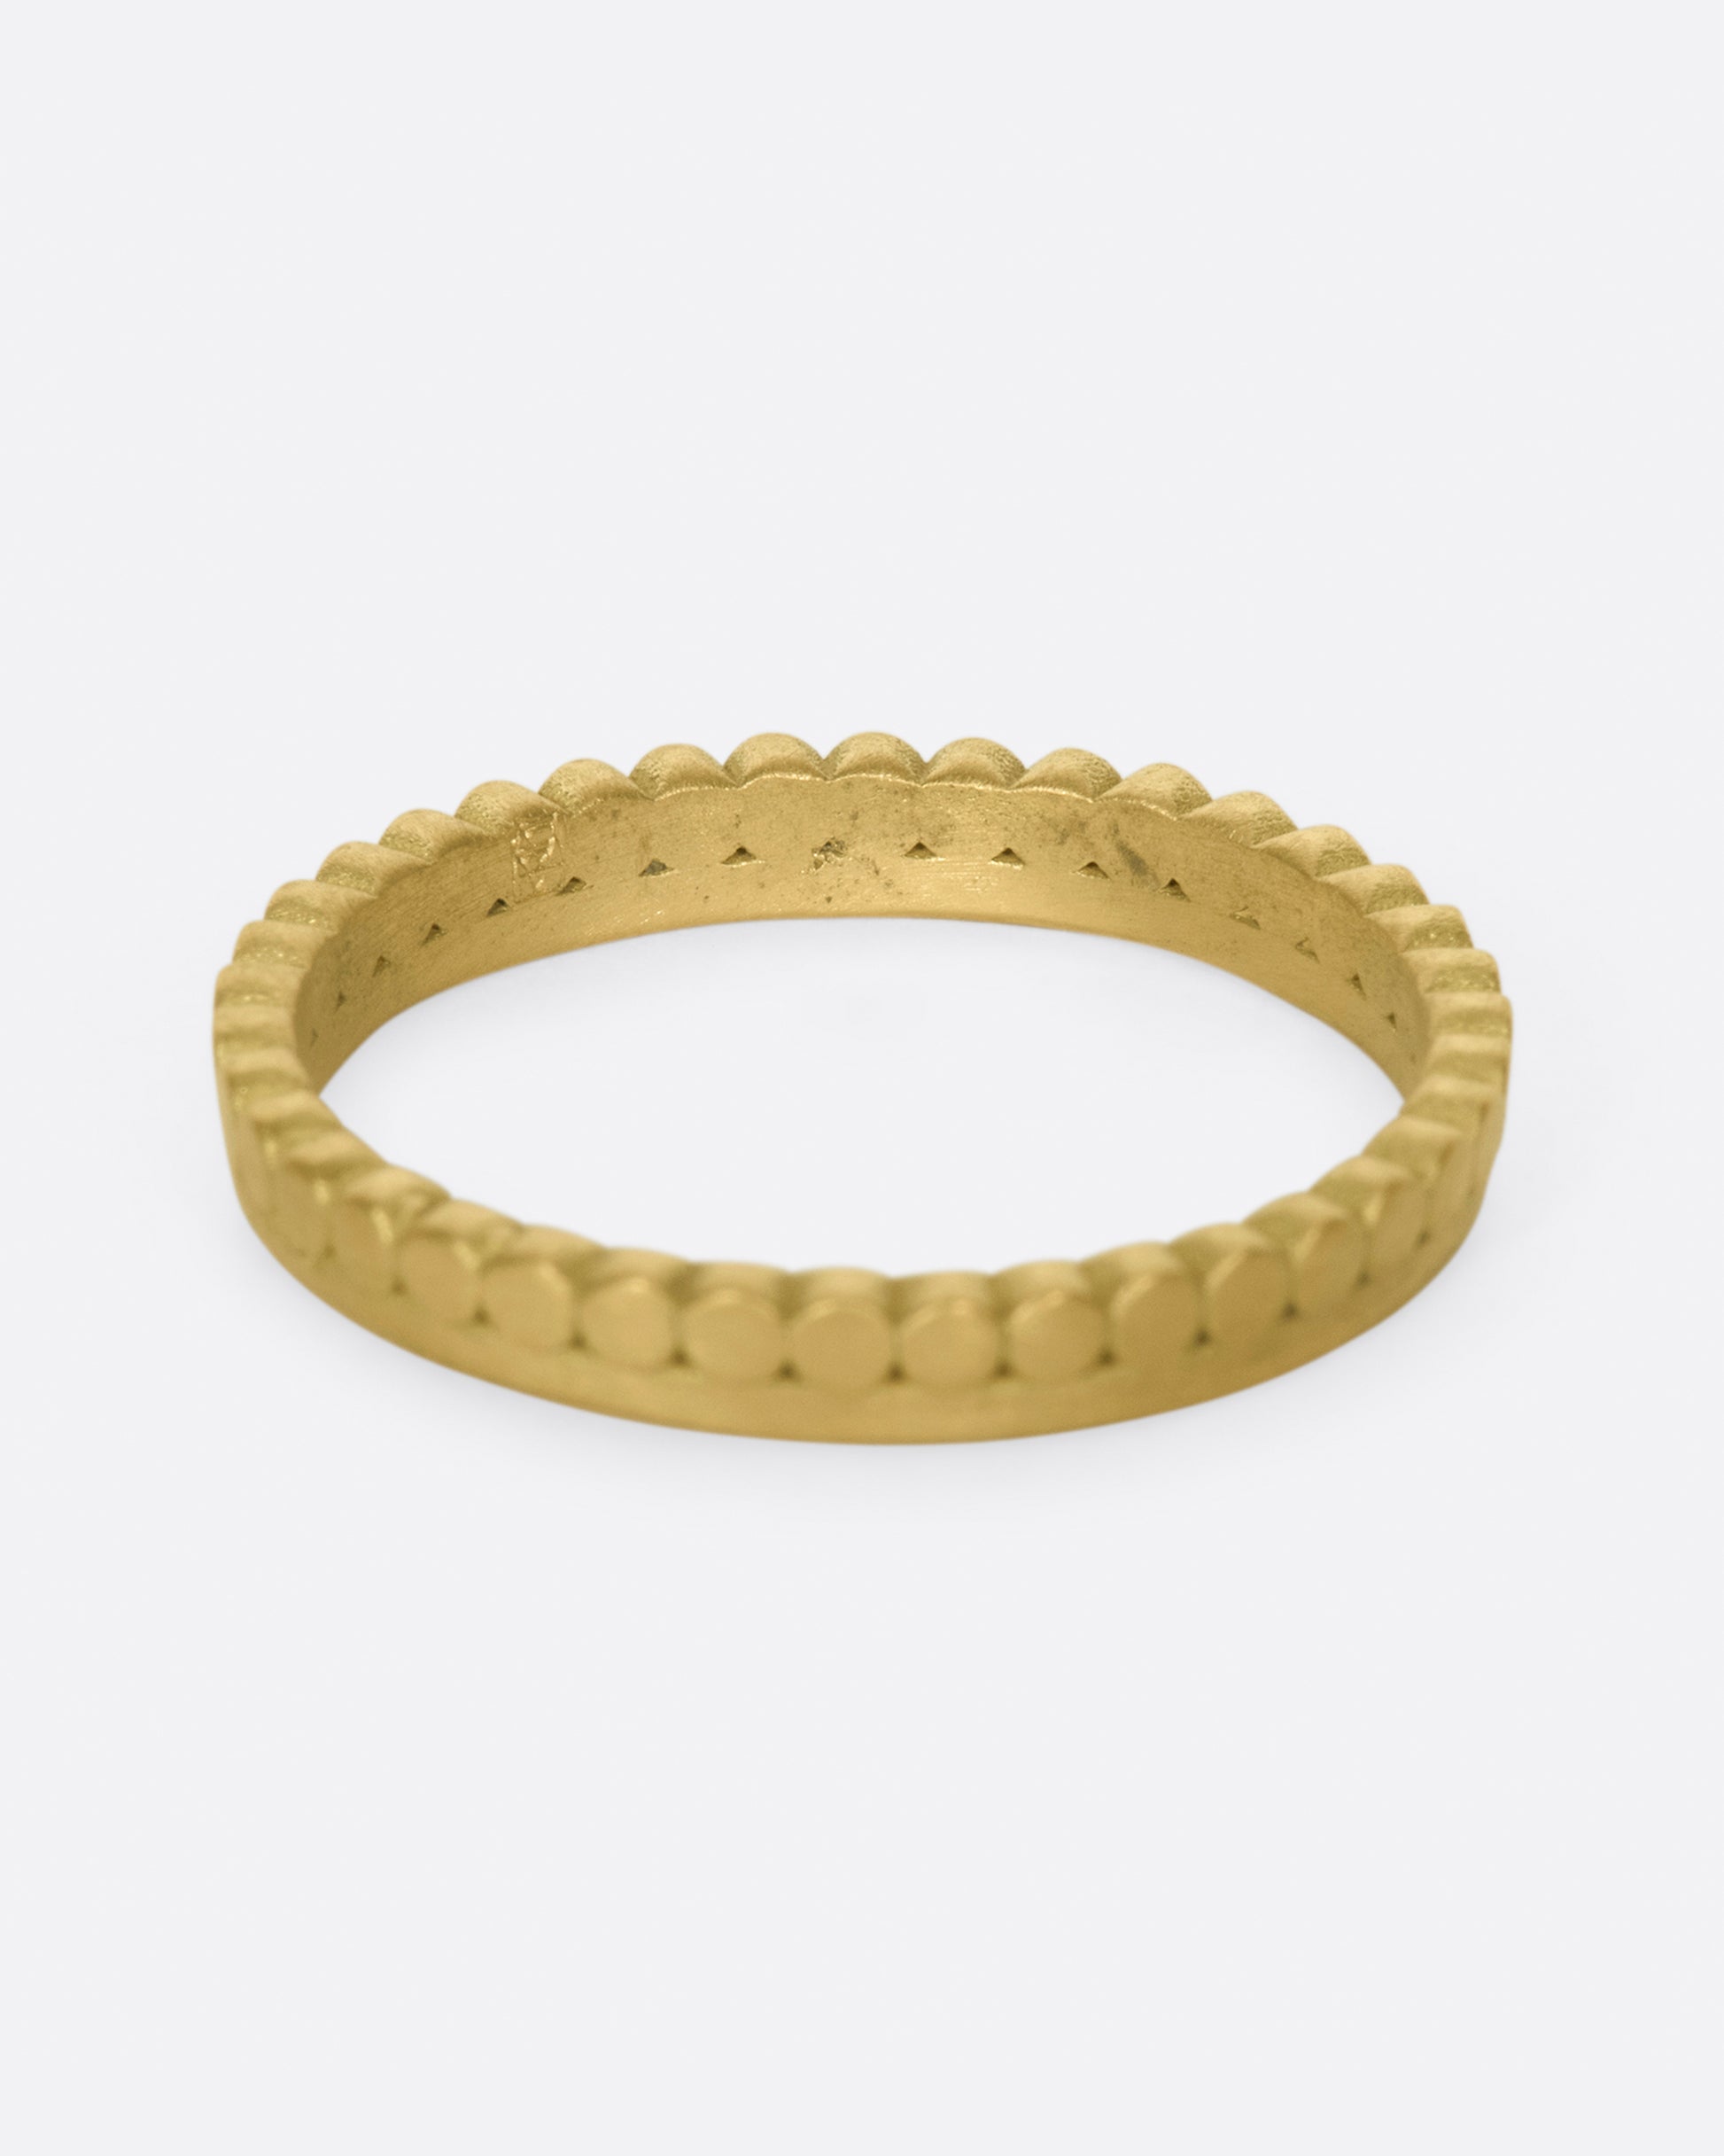 A matte gold band with dots encircling one side of the ring.